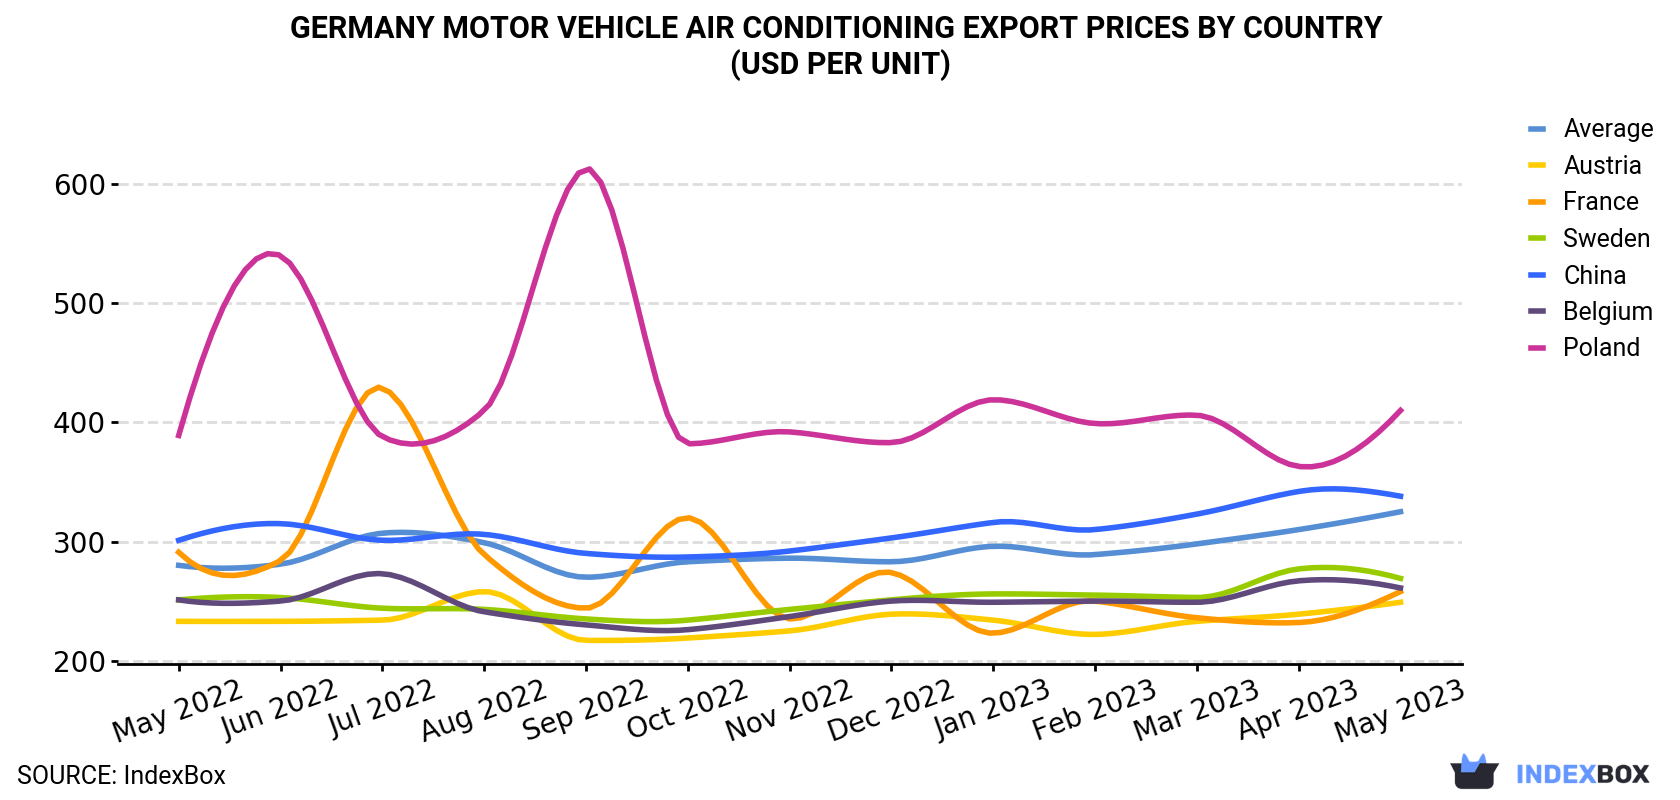 Germany Motor Vehicle Air Conditioning Export Prices By Country (USD Per Unit)